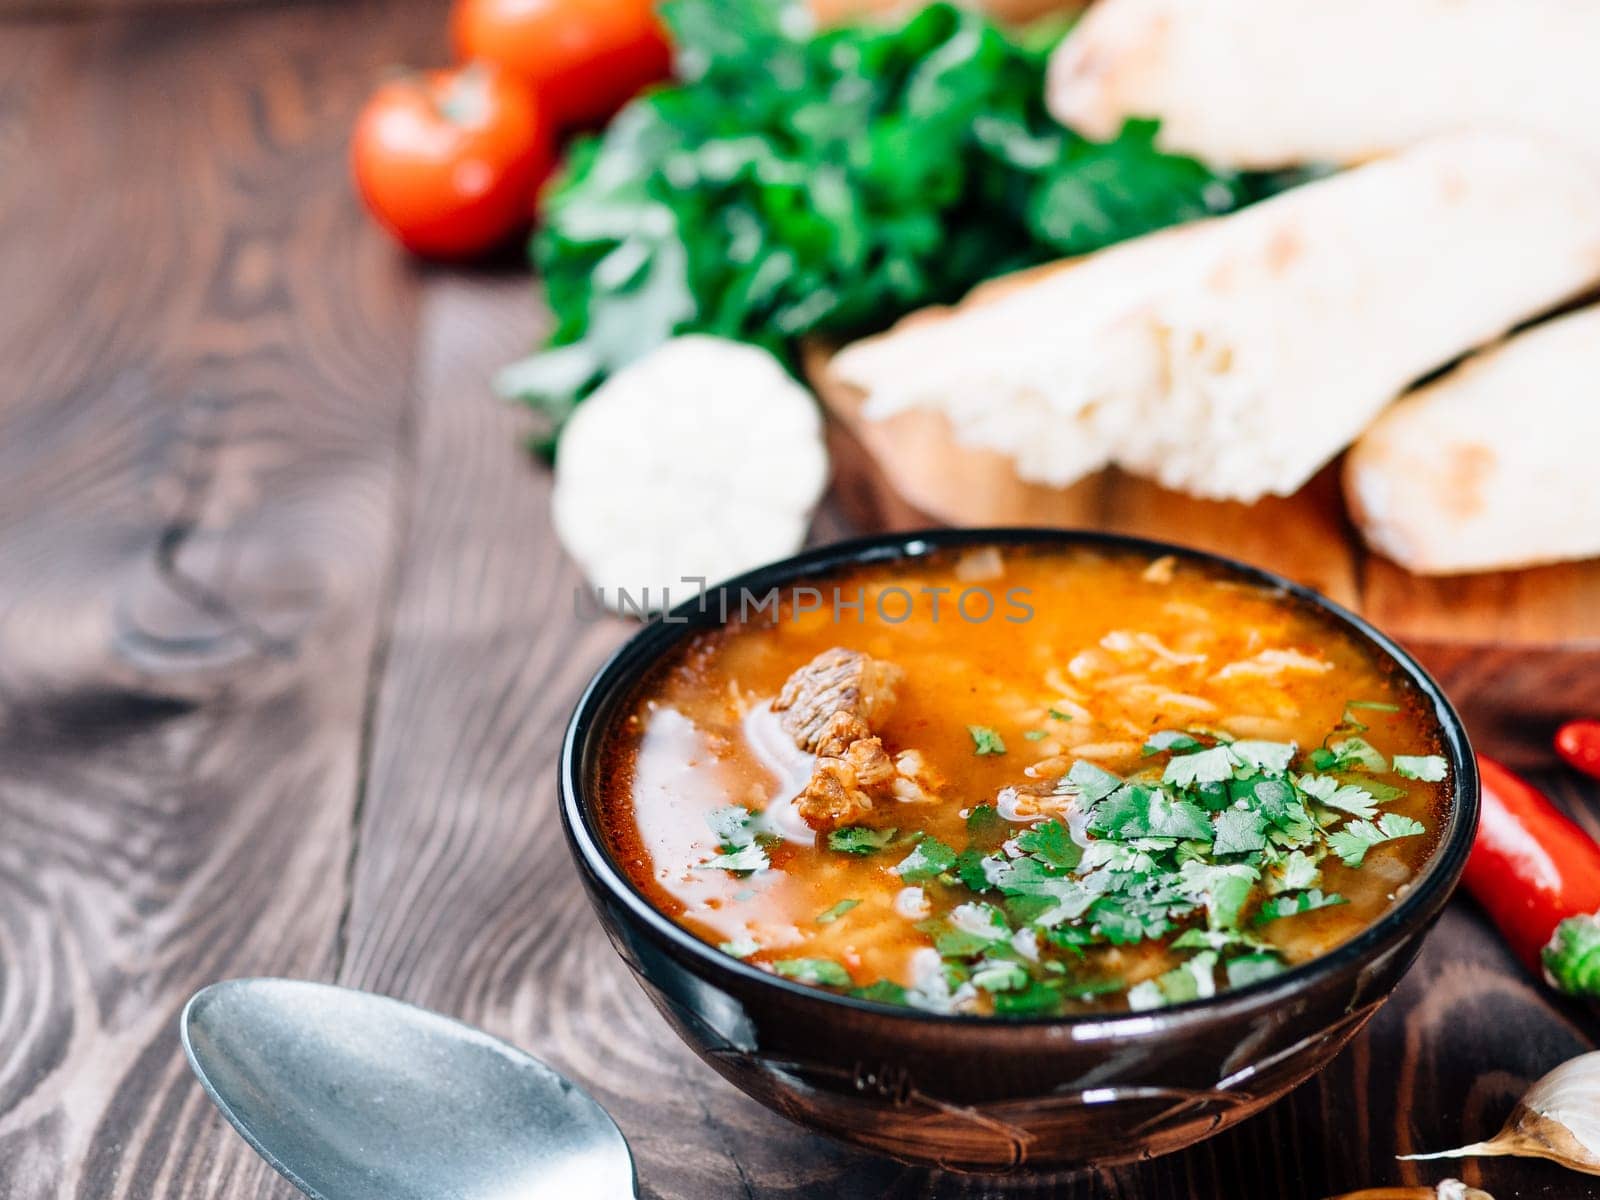 Traditional Georgian kitchen-soup Kharcho with meat, rice and fresh cilantro. Spicy soup Kharcho on wooden table with traditional bread Shotis Puri and vegetables. Selective focus. Copy space for text